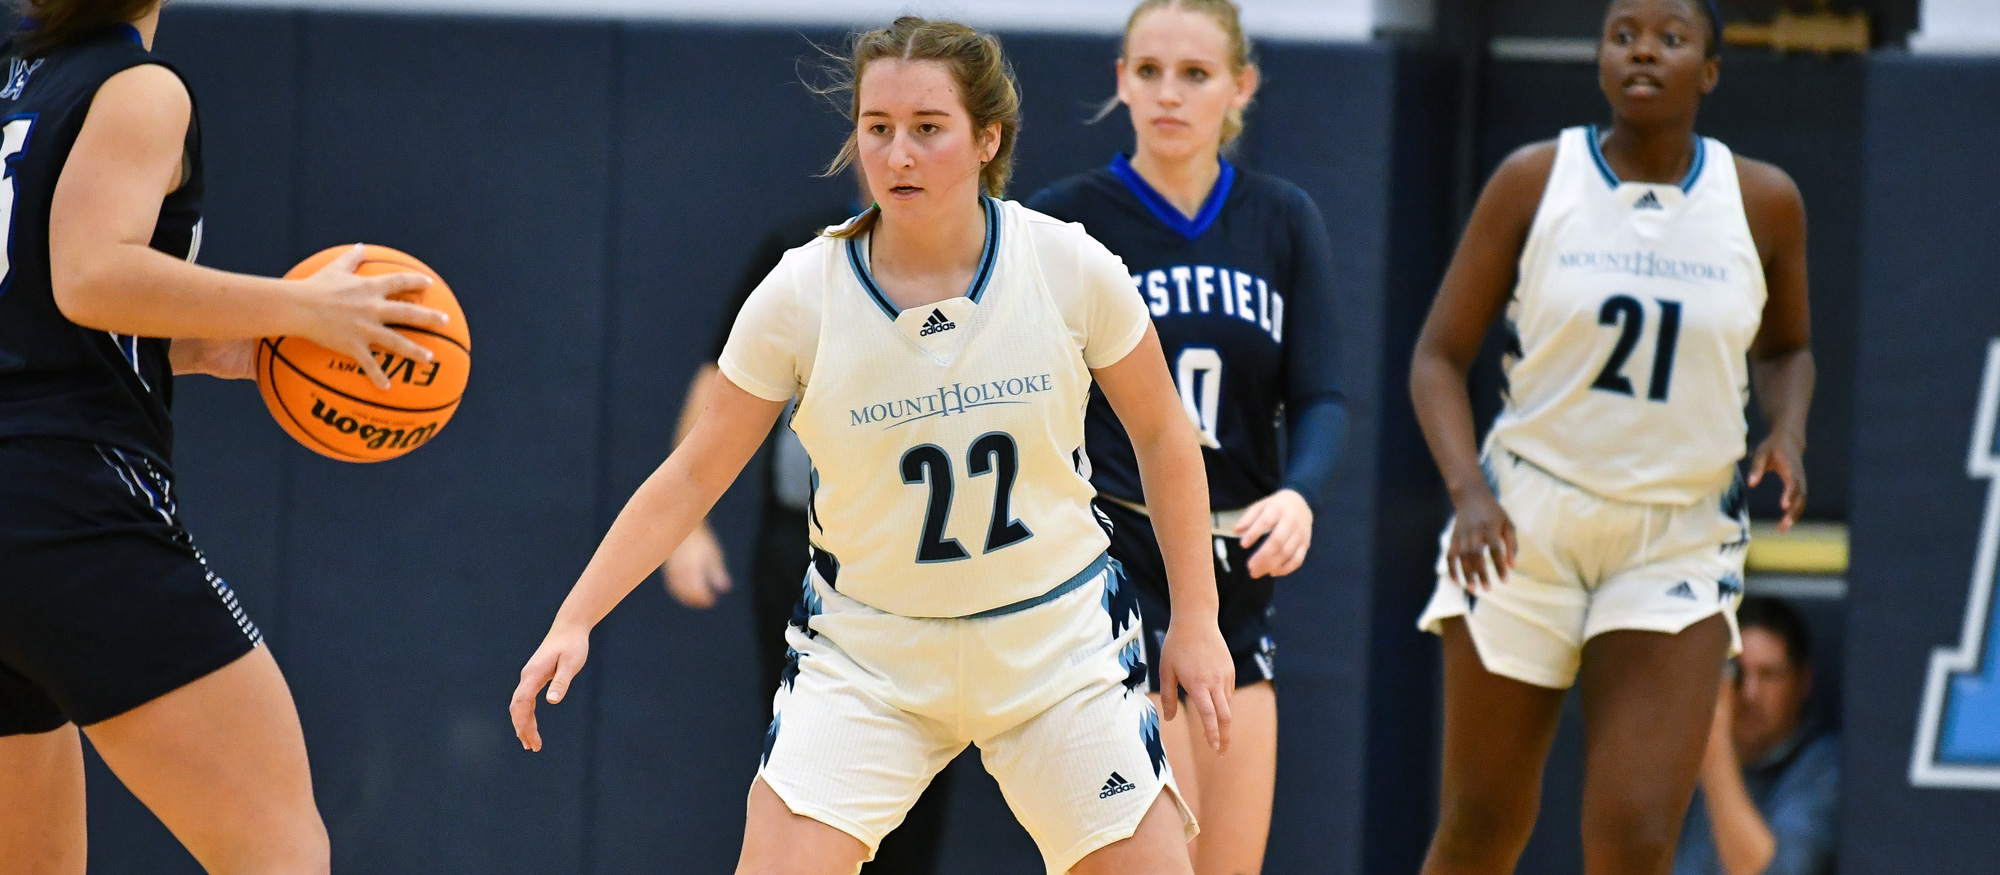 Kendall Maurer had six points and six rebounds in Mount Holyoke's loss to SUNY Geneseo on Dec. 30, 2022 in Puerto Rico. (RJB Sports file photo)